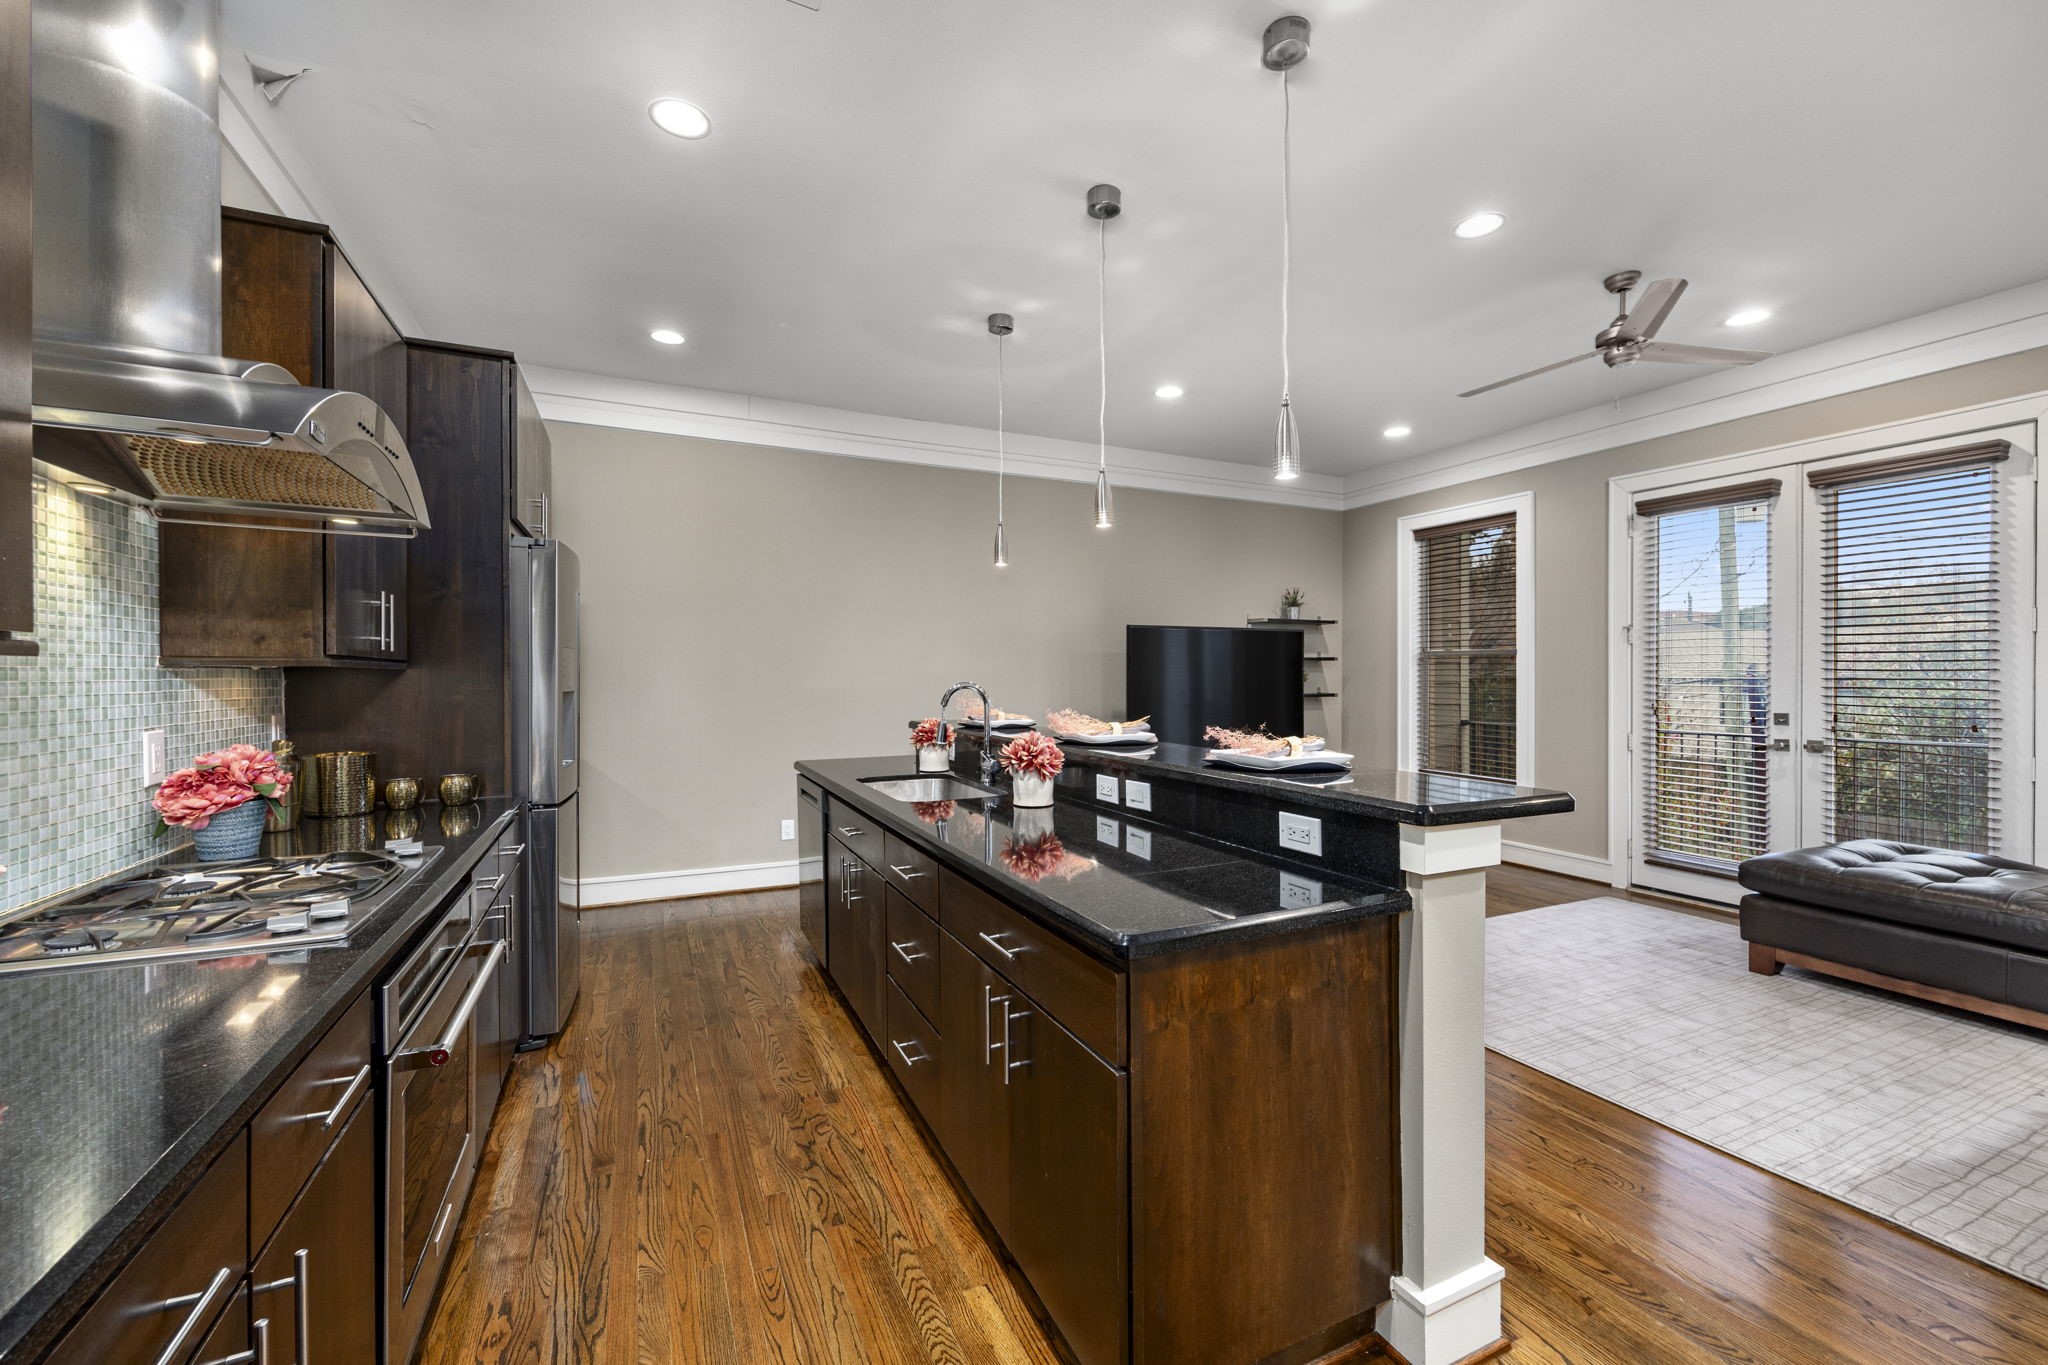 This gourmet kitchen features custom cabinets, recessed & pendant lighting, and granite countertops with a breakfast bar, which allows for extra seating for you & your guests! 322 Patterson St., Houston, TX  77007